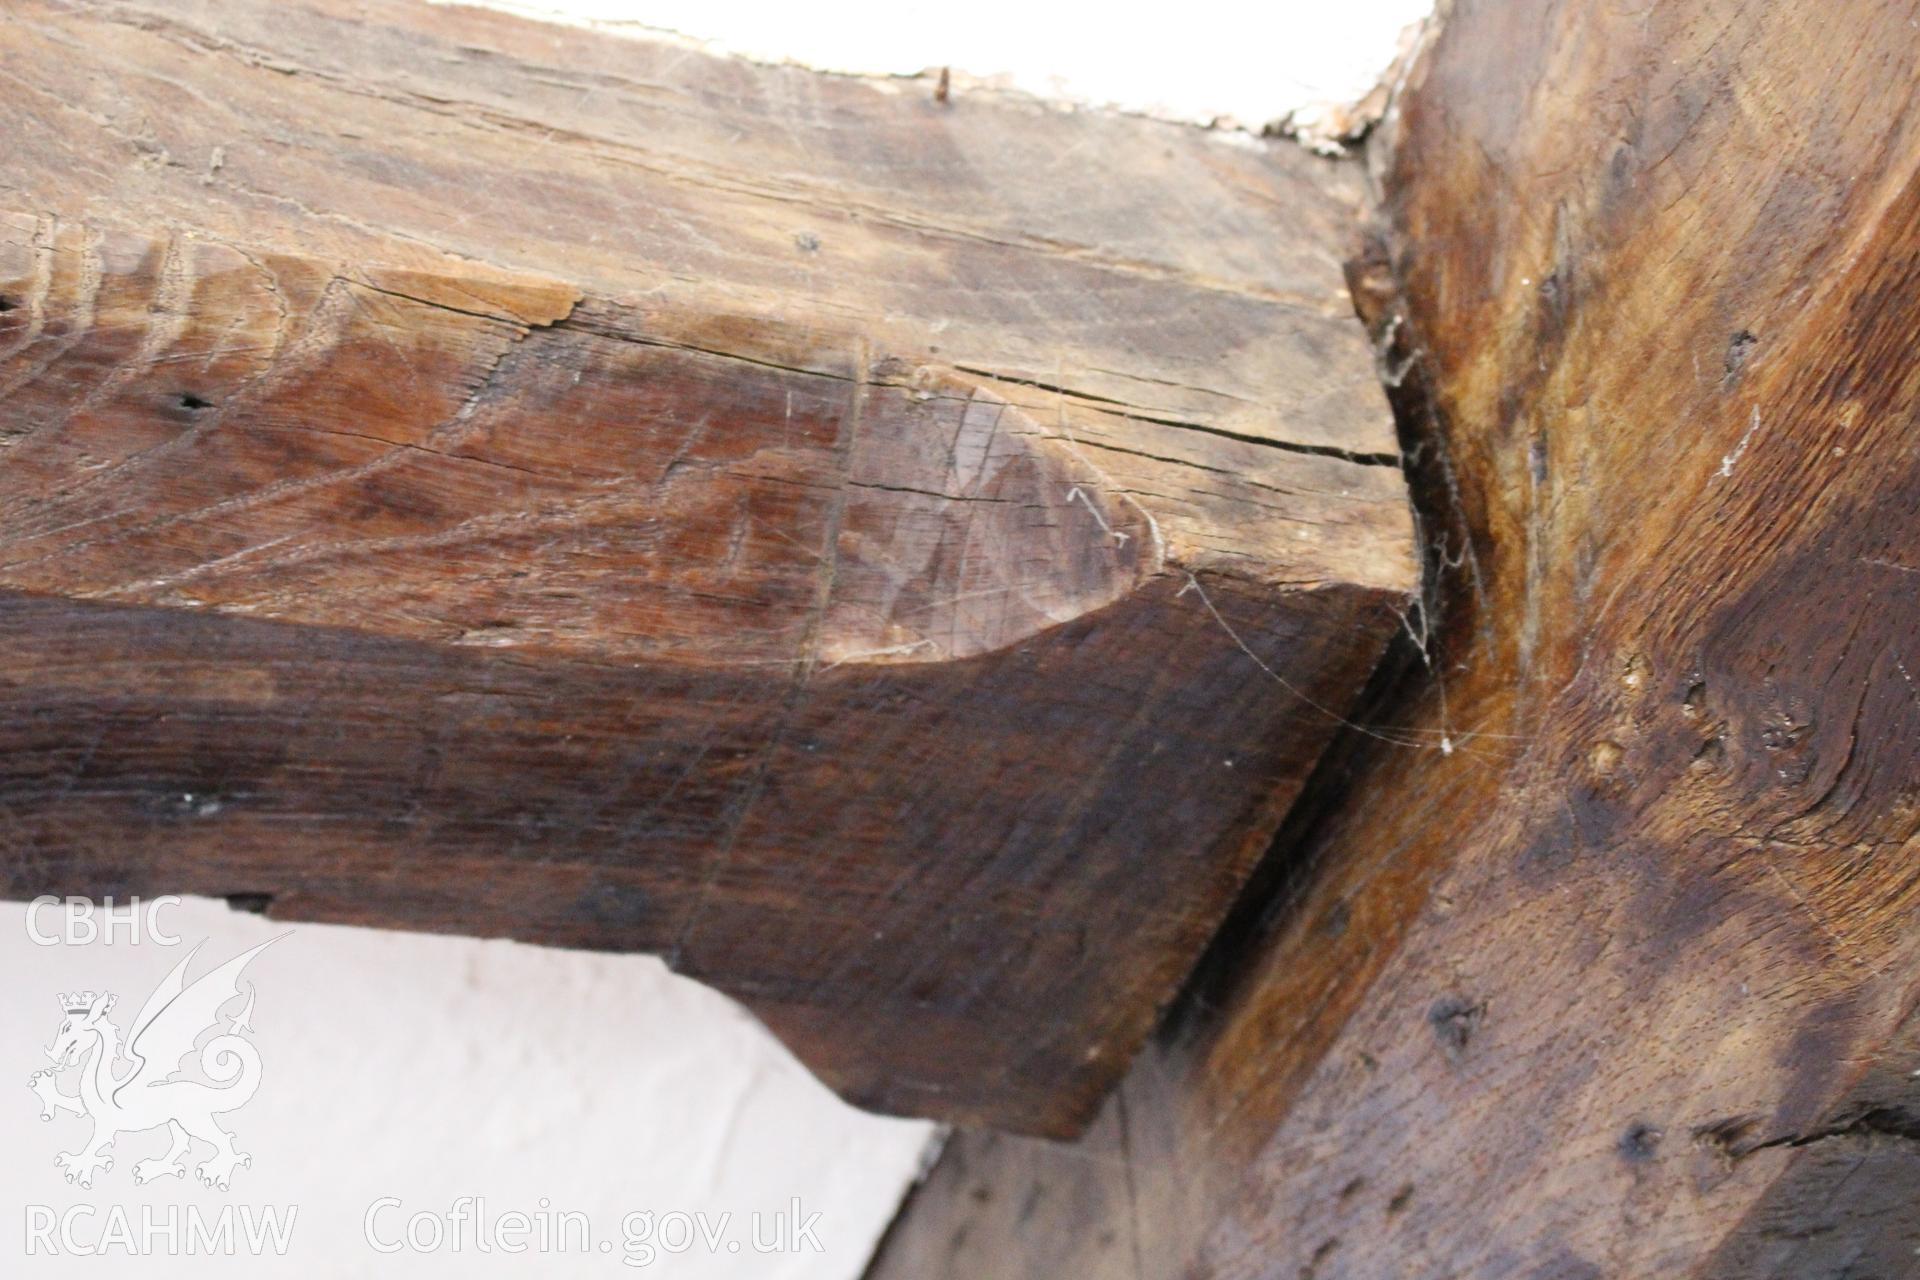 Colour photograph showing detail of wooden ceiling beam joint at 5-7 Mwrog Street, Ruthin. Photographed during survey conducted by Geoff Ward on 14th May 2014.